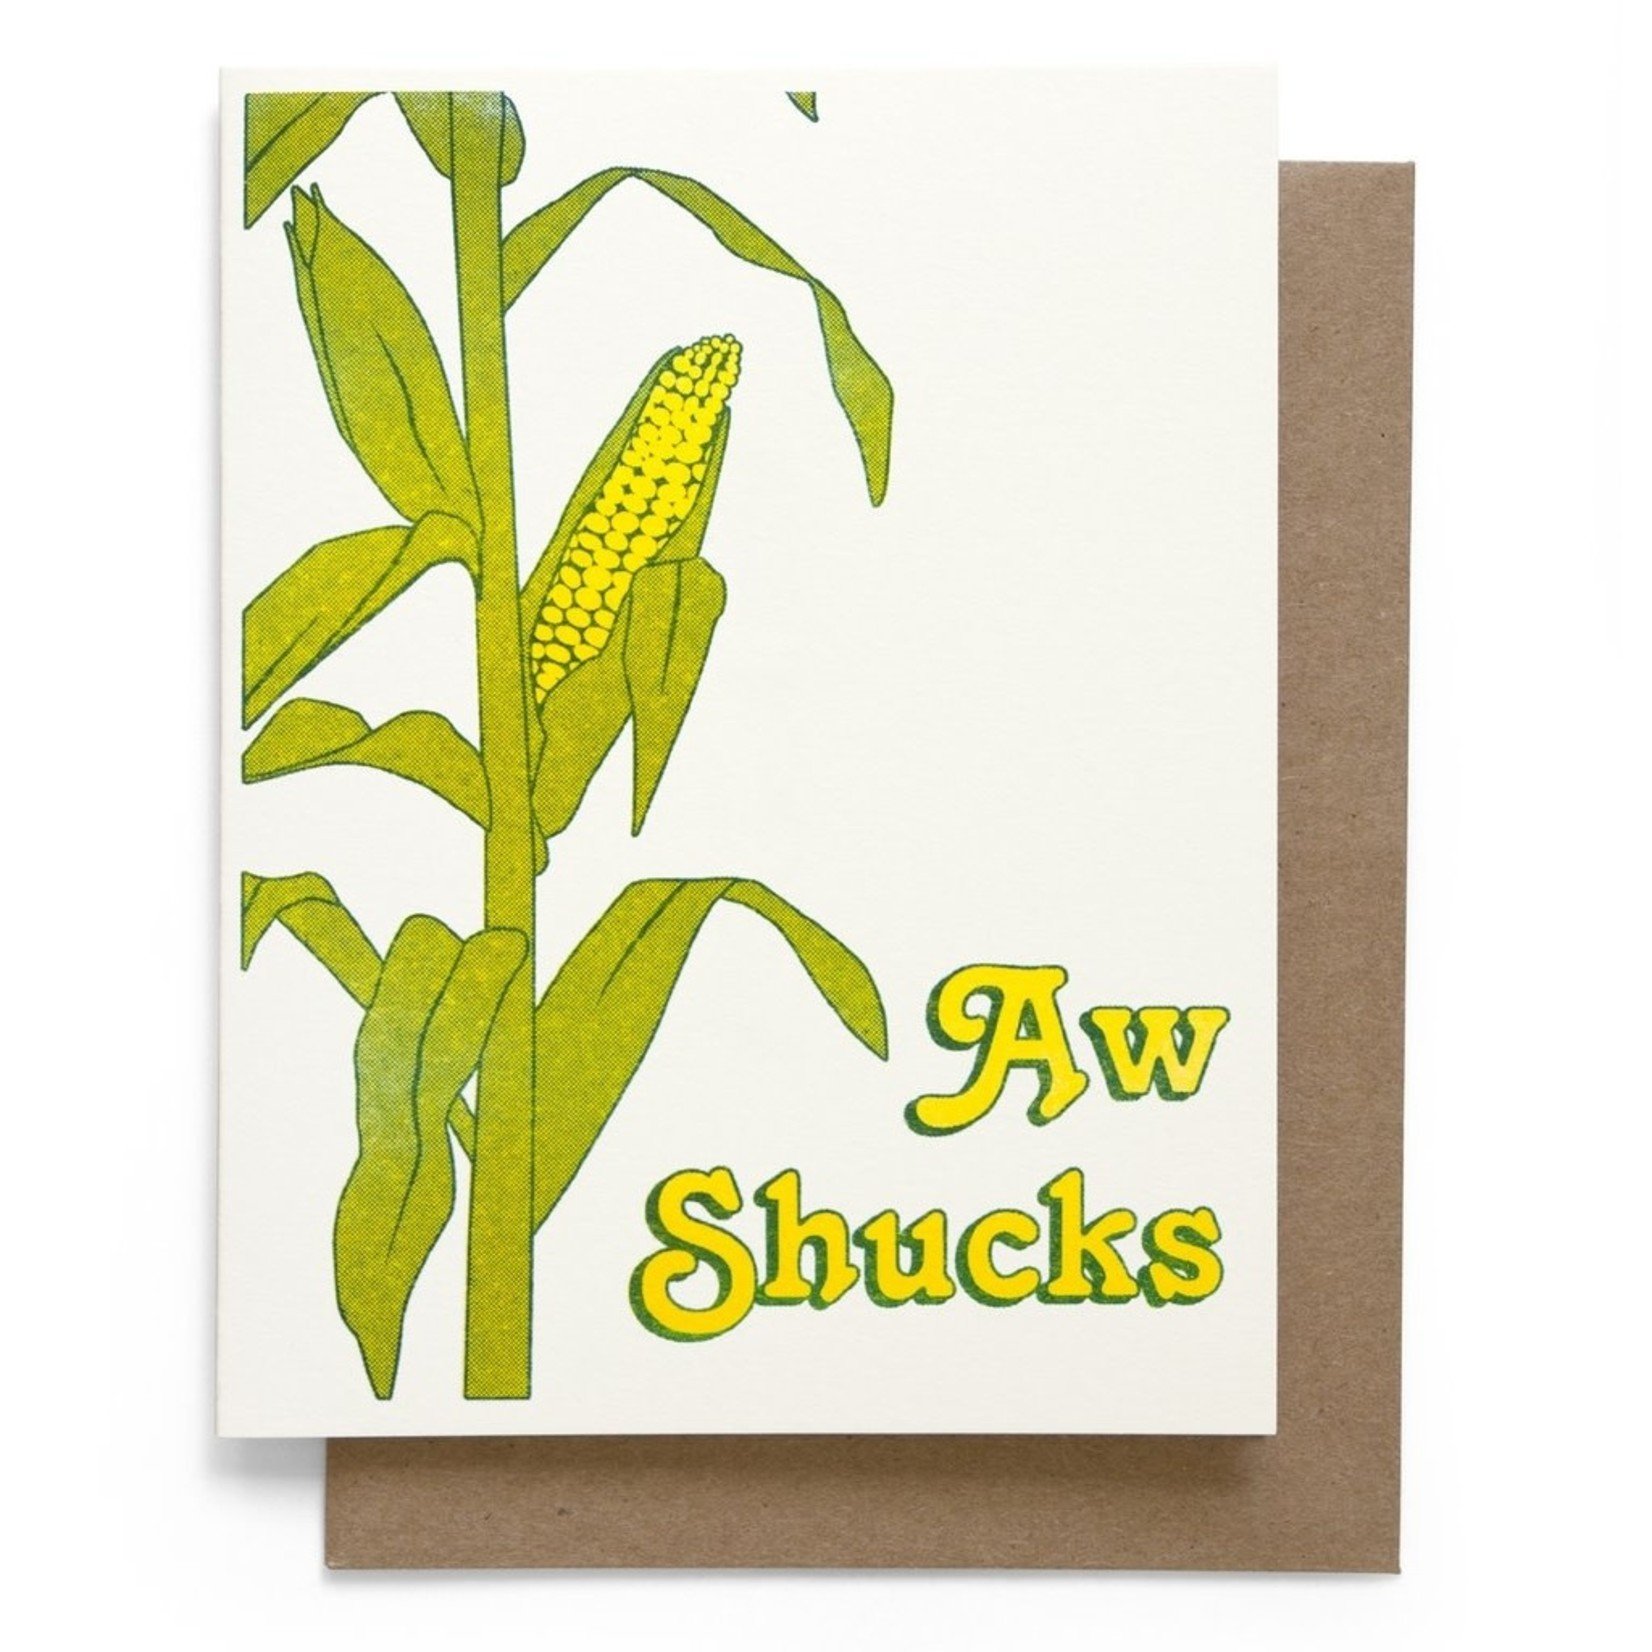 Smarty Pants Paper Co. Aw Shucks Greeting Card